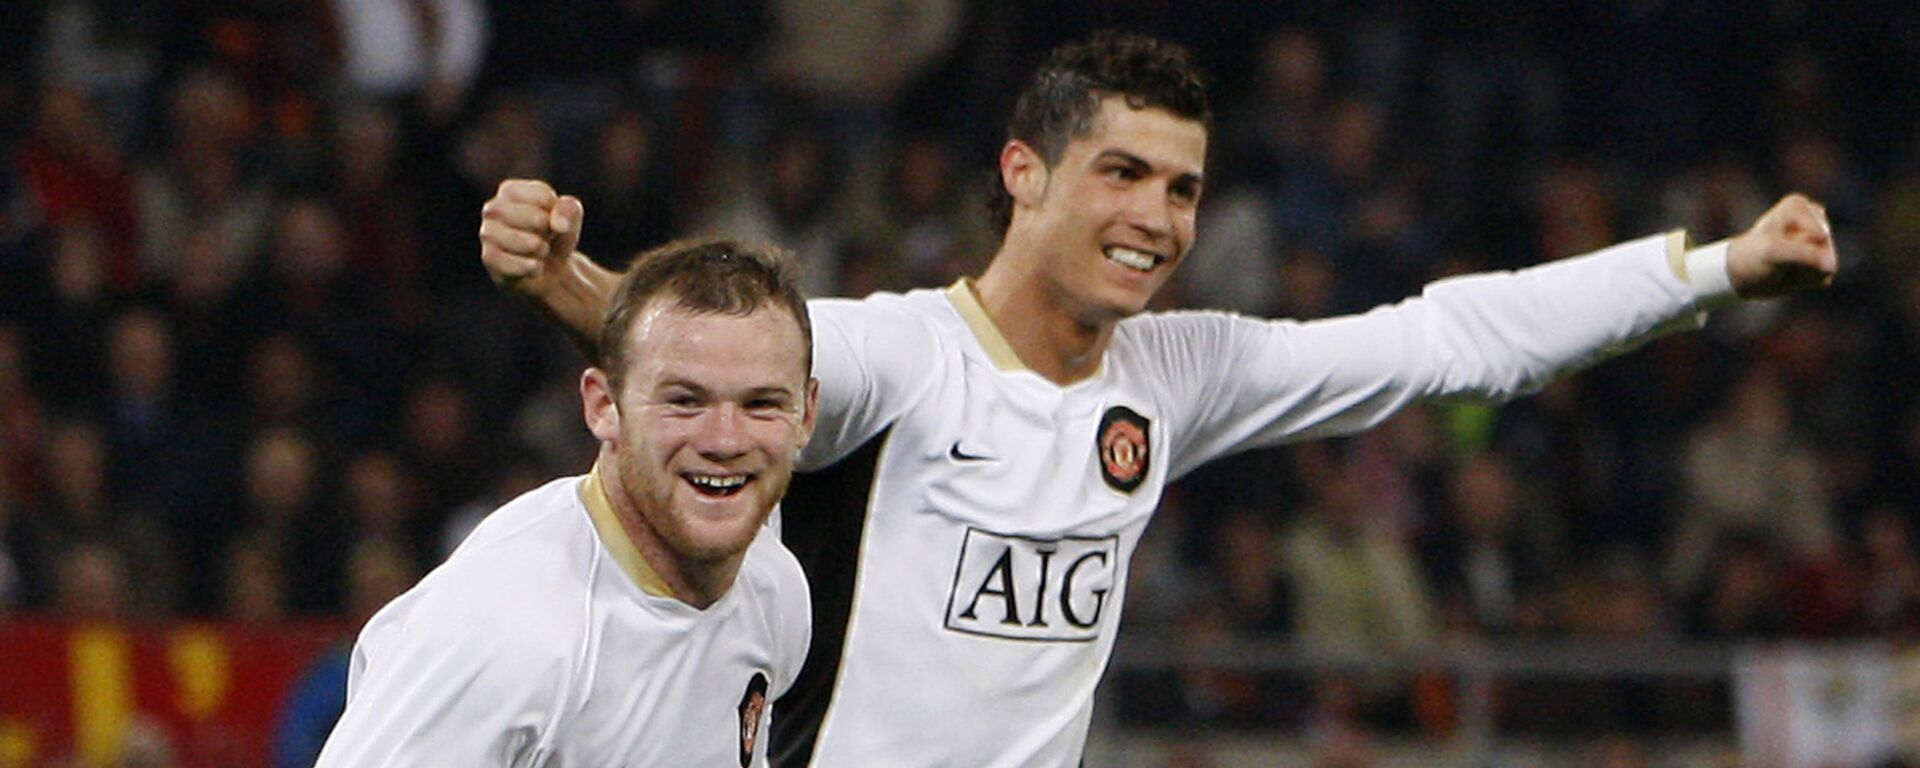 Manchester United's Wayne Rooney, left, celebrates after scoring  against AS Roma with teammate Cristiano Ronaldo, during their Champion's League quarterfinal, first-leg soccer match at the Rome Olympic stadium, Rome, Italy, Tuesday April 1, 2008. Manchester United won 2-0 with the first goal scored by Ronaldo and the second one by Rooney. - اسپوتنیک افغانستان  , 1920, 09.09.2021